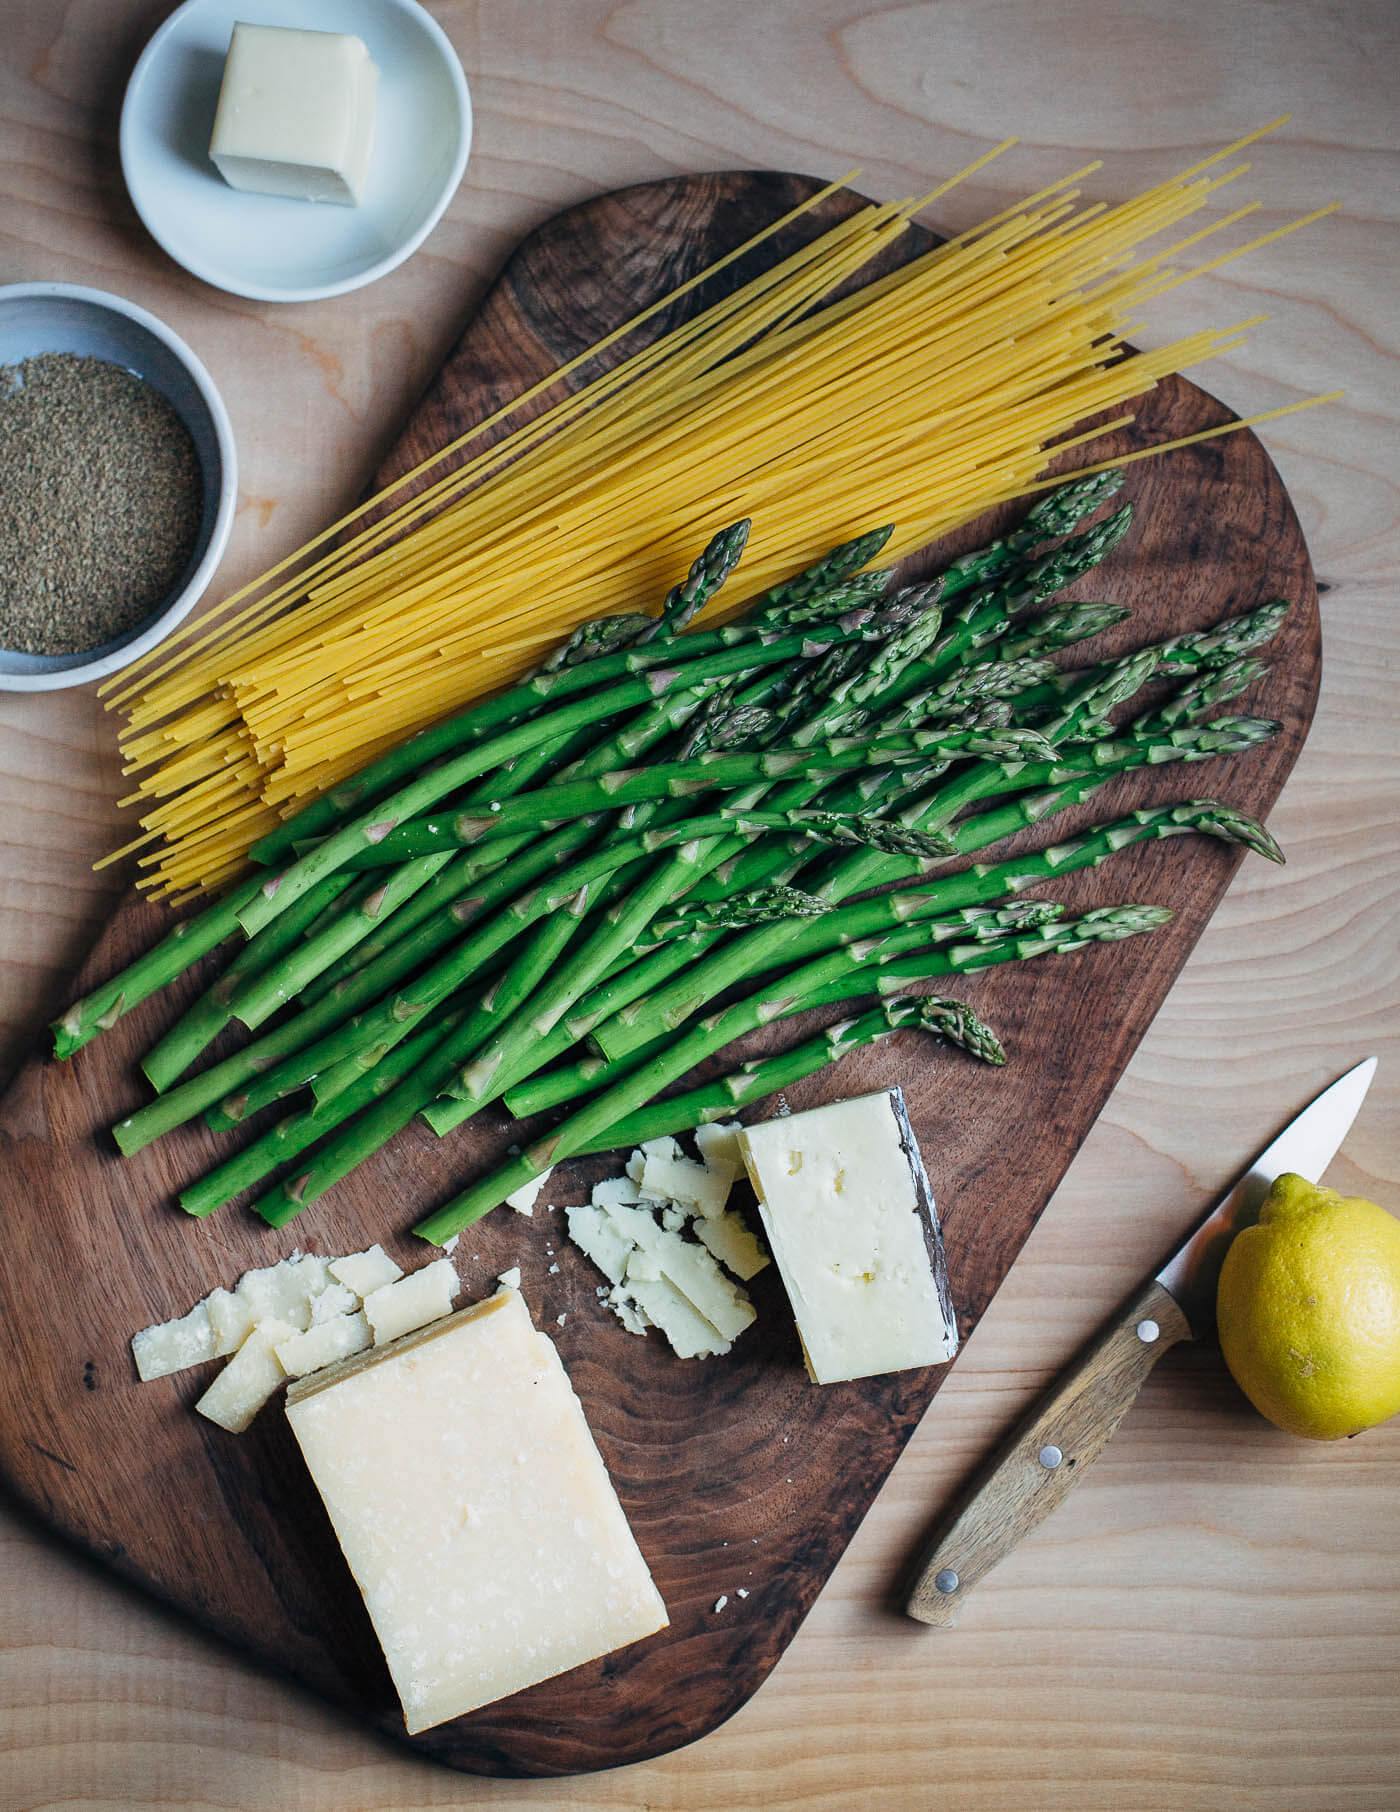 Ingredients for cacio e pepe with asparagus